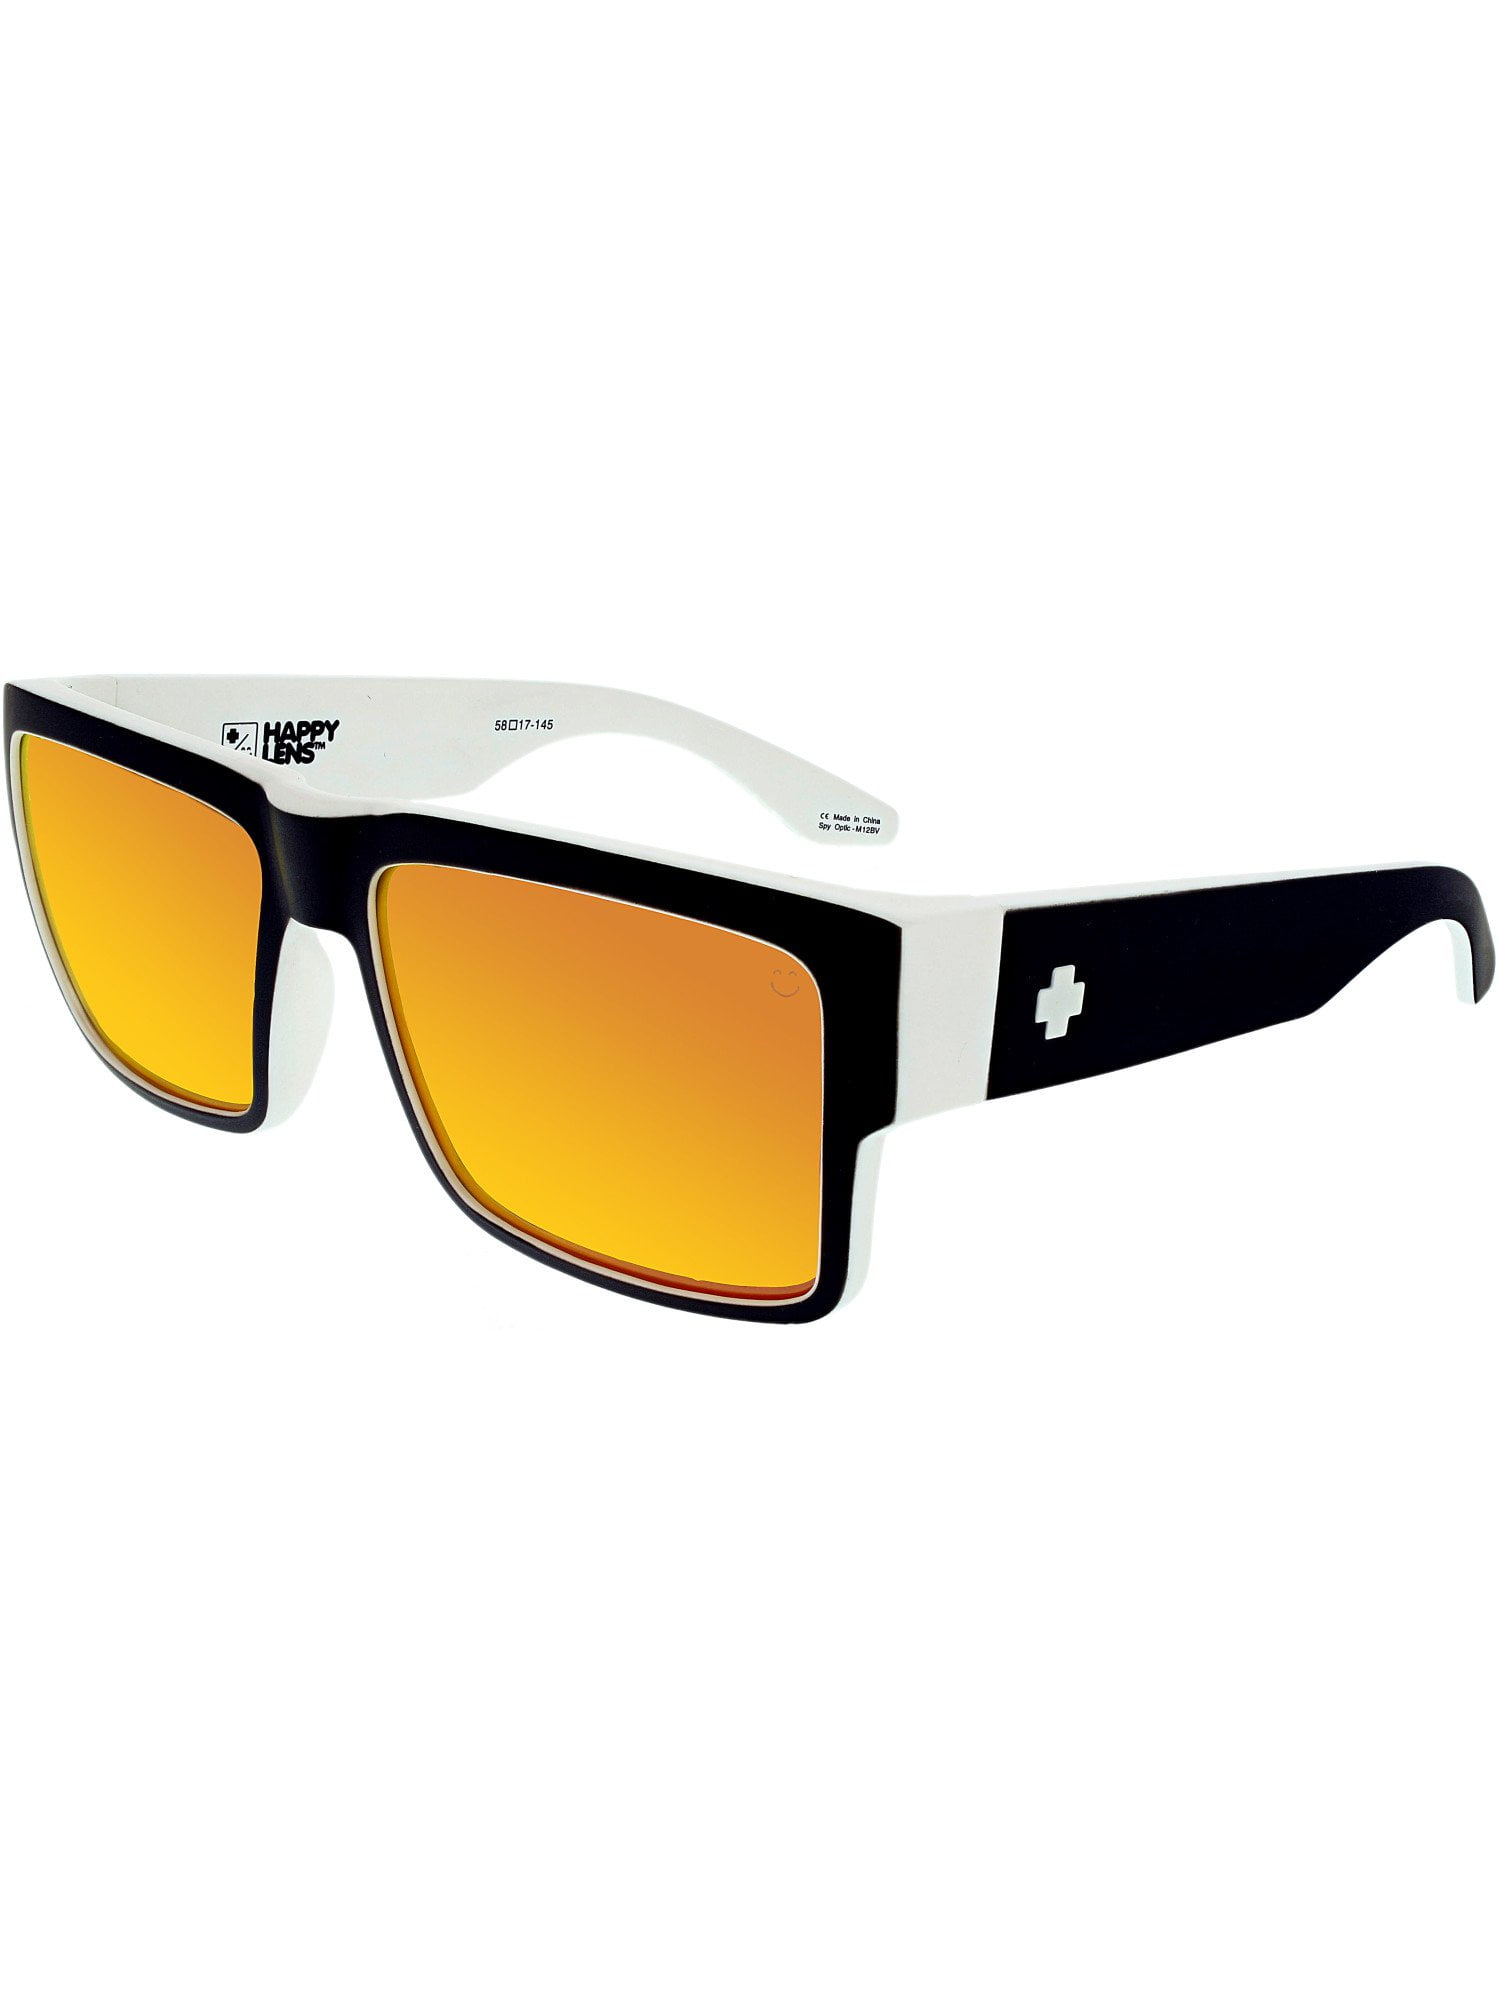 Spy Sunglasses 673180209365 Cyrus HD Plus Mirrored Lenses Scratch Resistant  Square Shape, Wrap Athletic, Whitewall